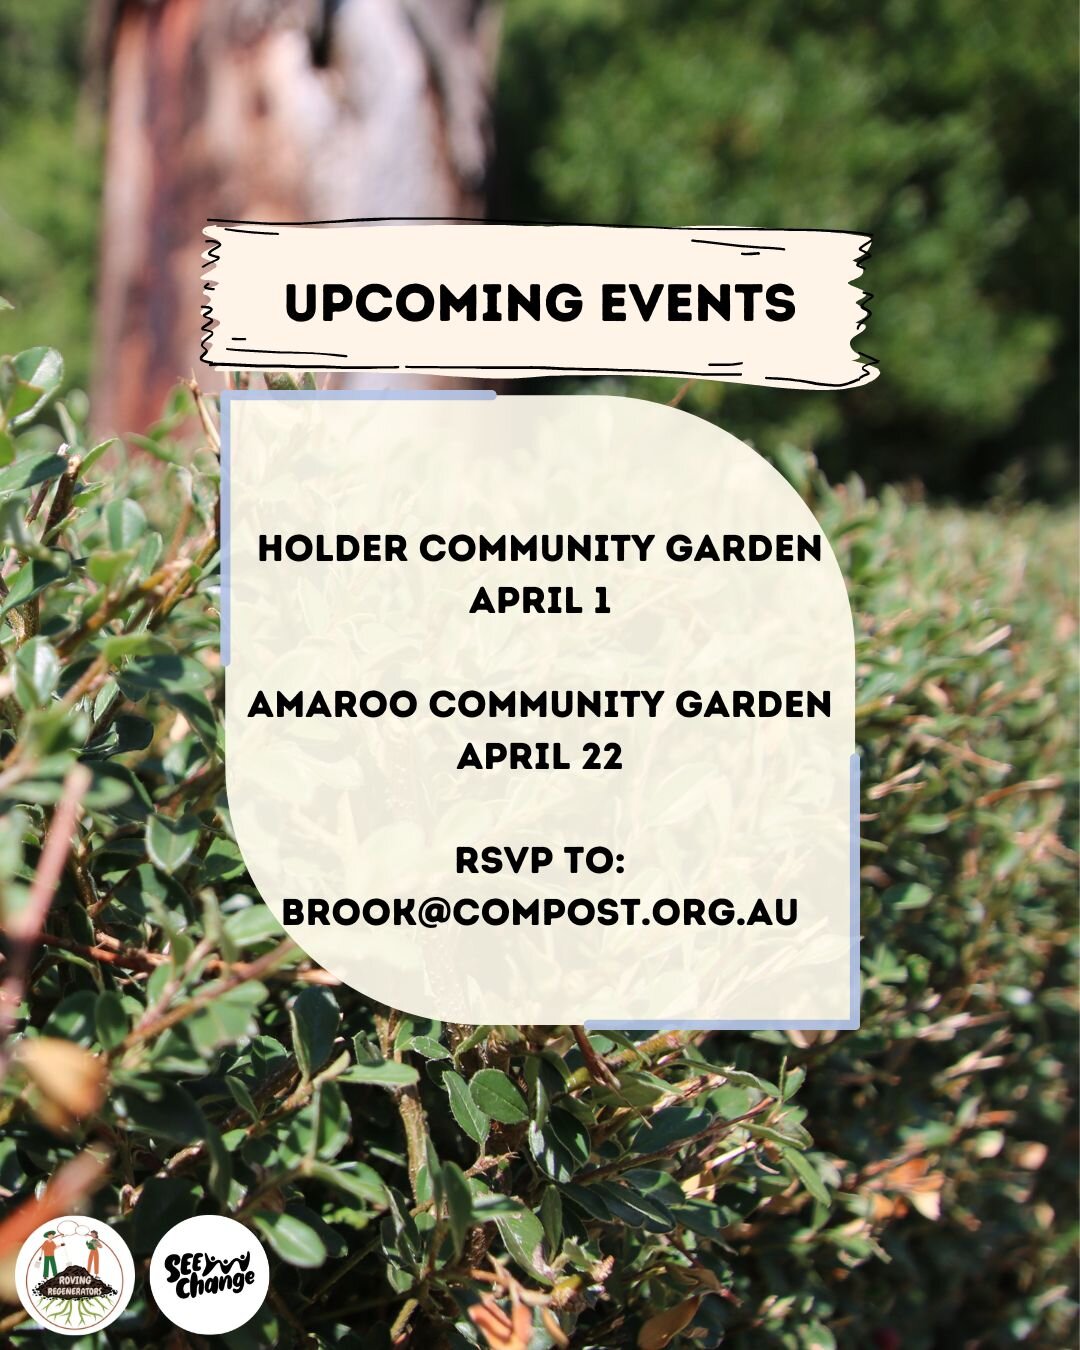 🪴Composting Workshops🪴 
The rolling around of autumn means that composters rejoice! 
Our upcoming events for April are on the 1st at the Holder Community Gardens, and on the 22nd at the Amaroo Community Gardens. We really hope to see you there!
You